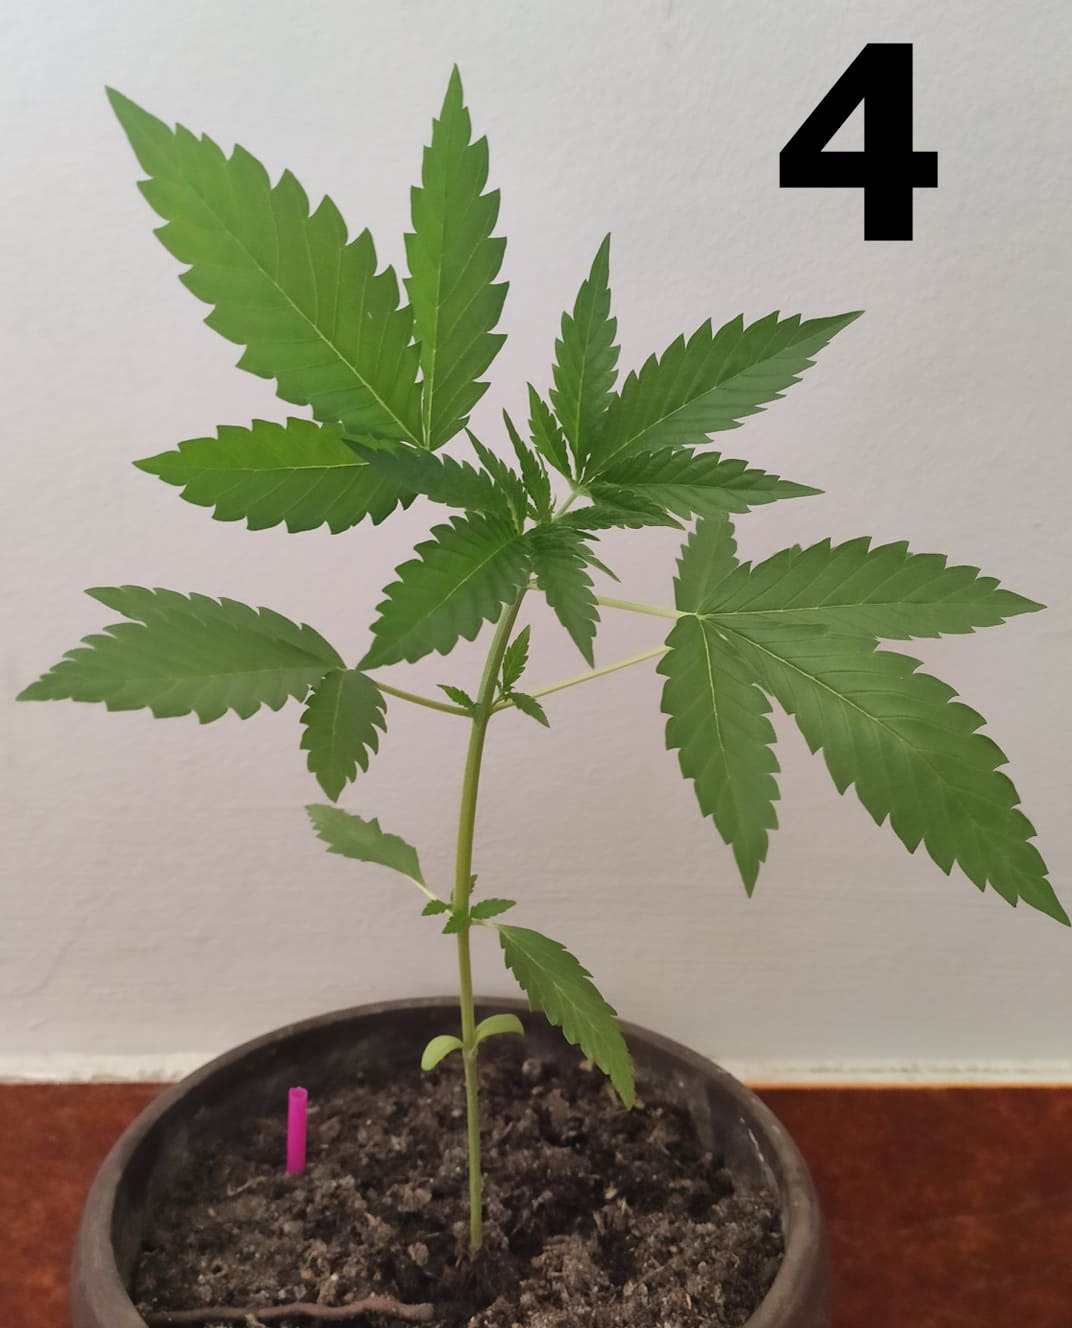 Plants stopped growing problem 5